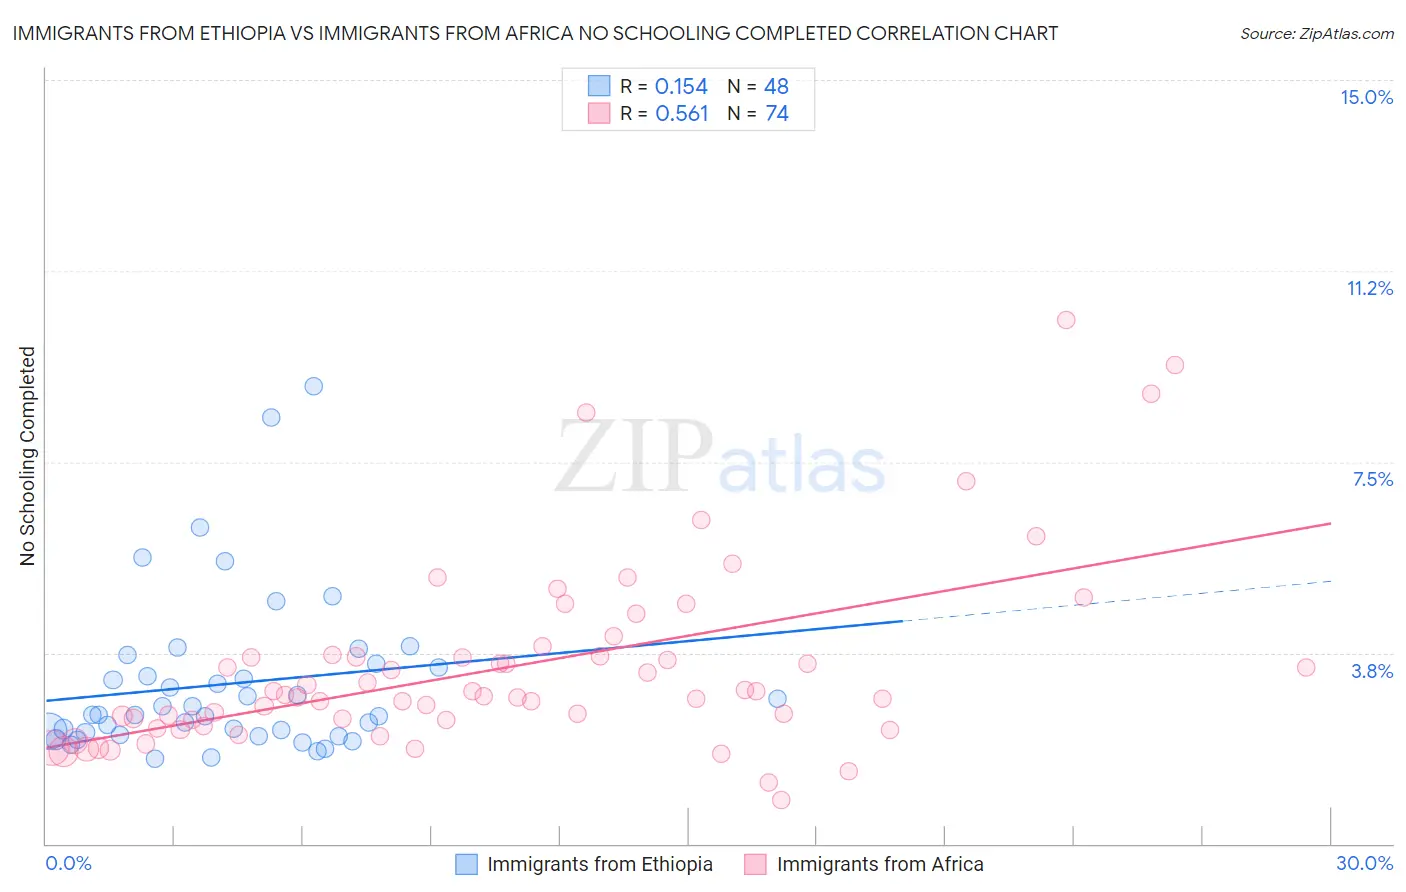 Immigrants from Ethiopia vs Immigrants from Africa No Schooling Completed